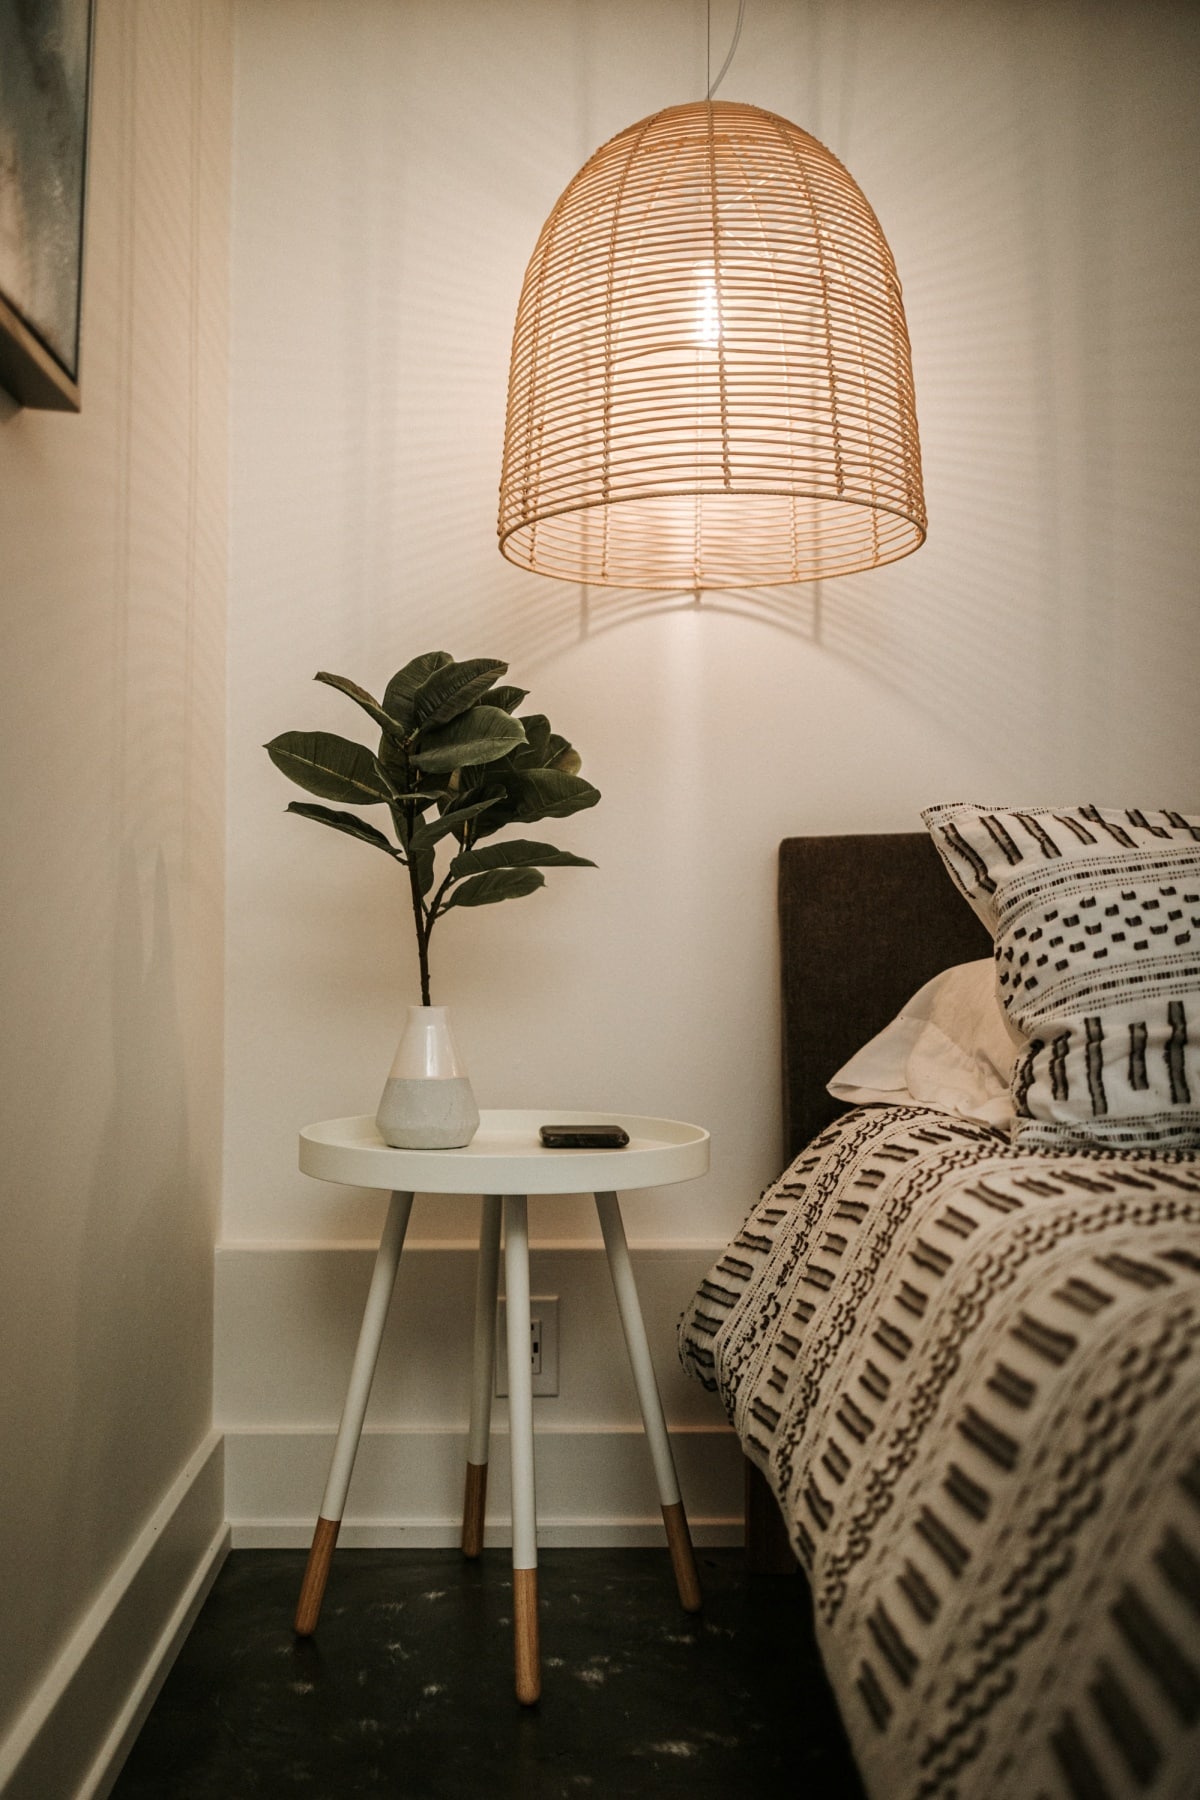 A basket hanging lamp above a white bedside table with plant